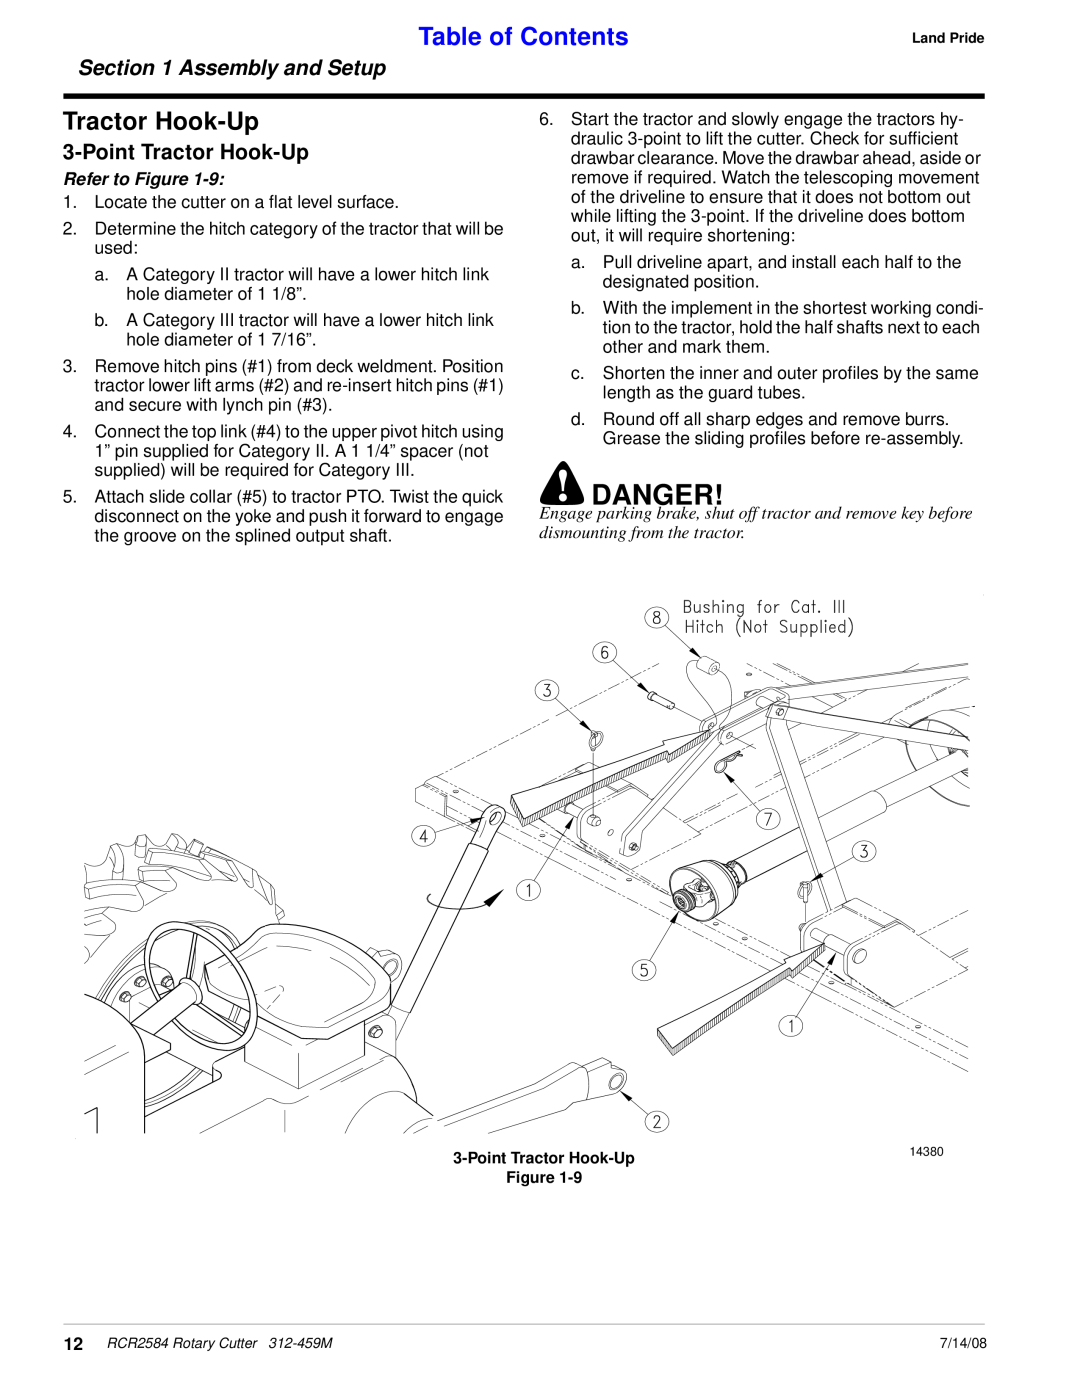 Land Pride RCR2584 manual Point Tractor Hook-Up, Danger, Table of Contents, Assembly and Setup, Refer to Figure 